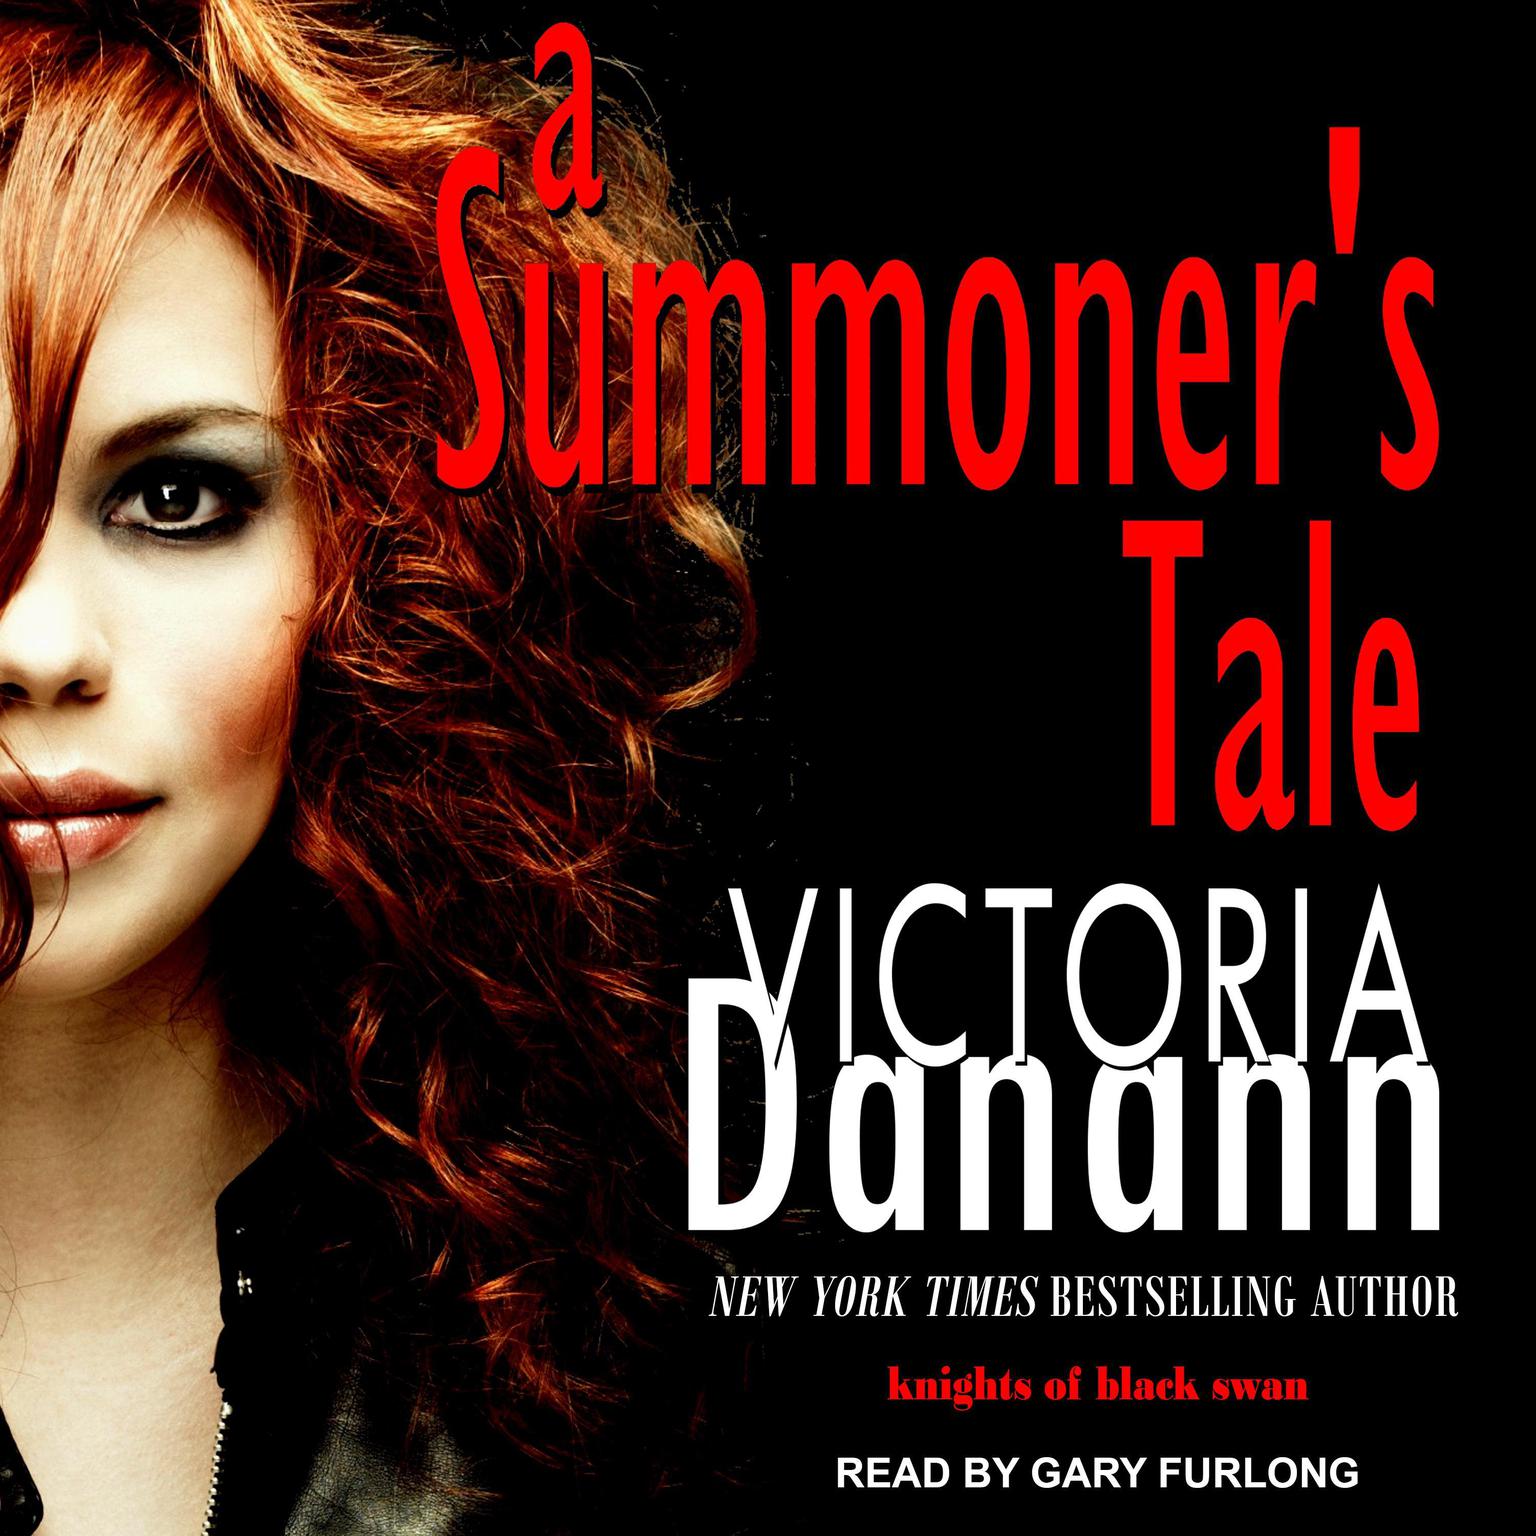 A Summoners Tale Audiobook, by Victoria Danann